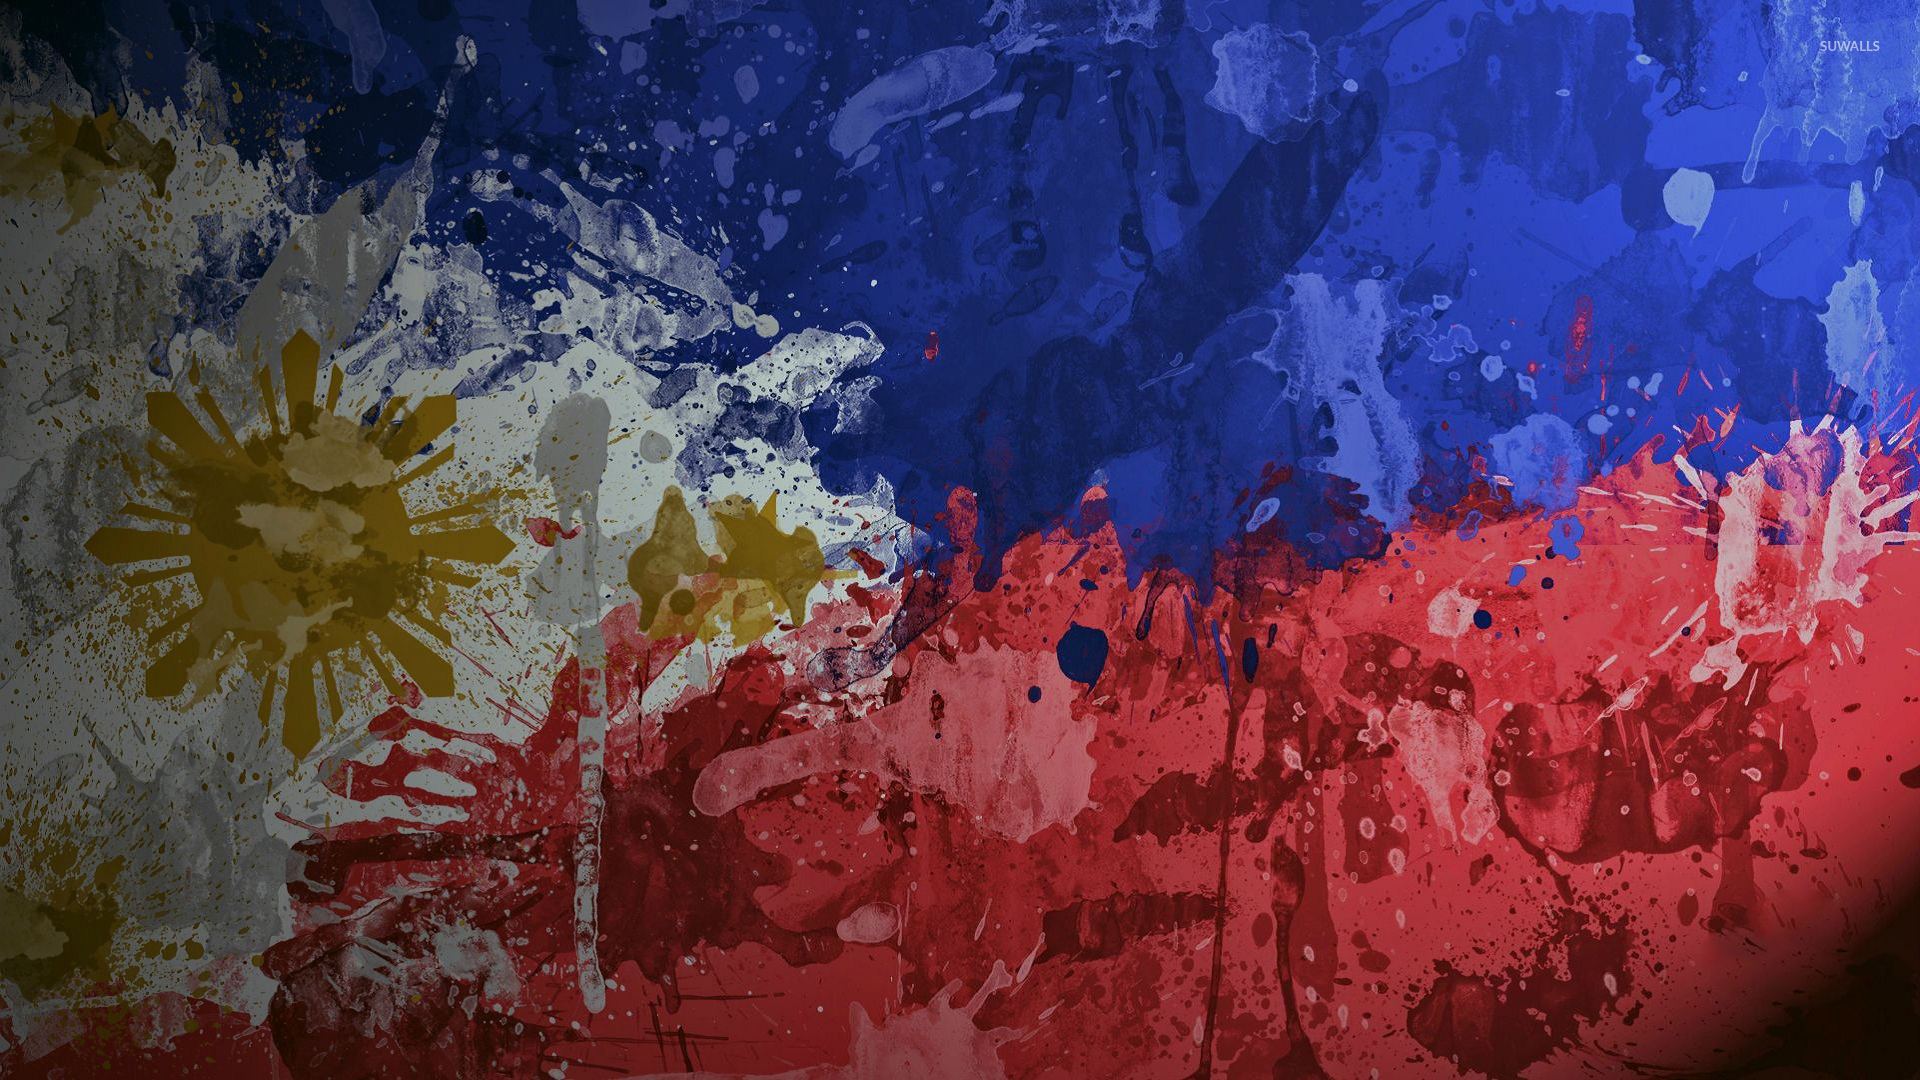 Philippines - The Philippines Wallpaper (41501907) - Fanpop